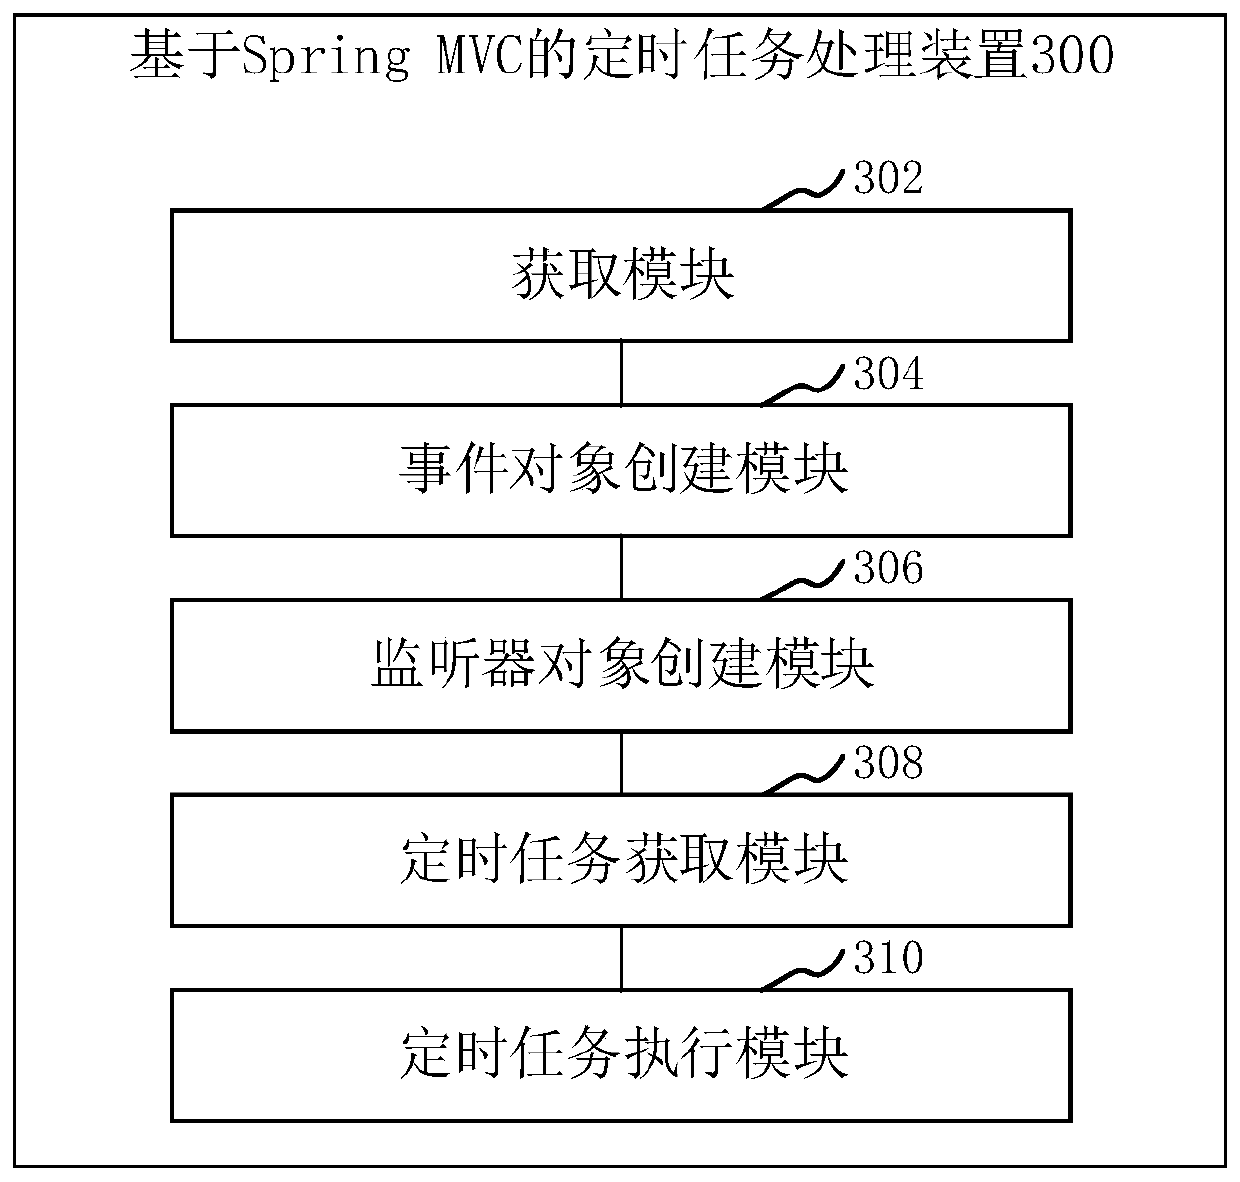 Timing task processing method and device based on Spring MVC and computer device